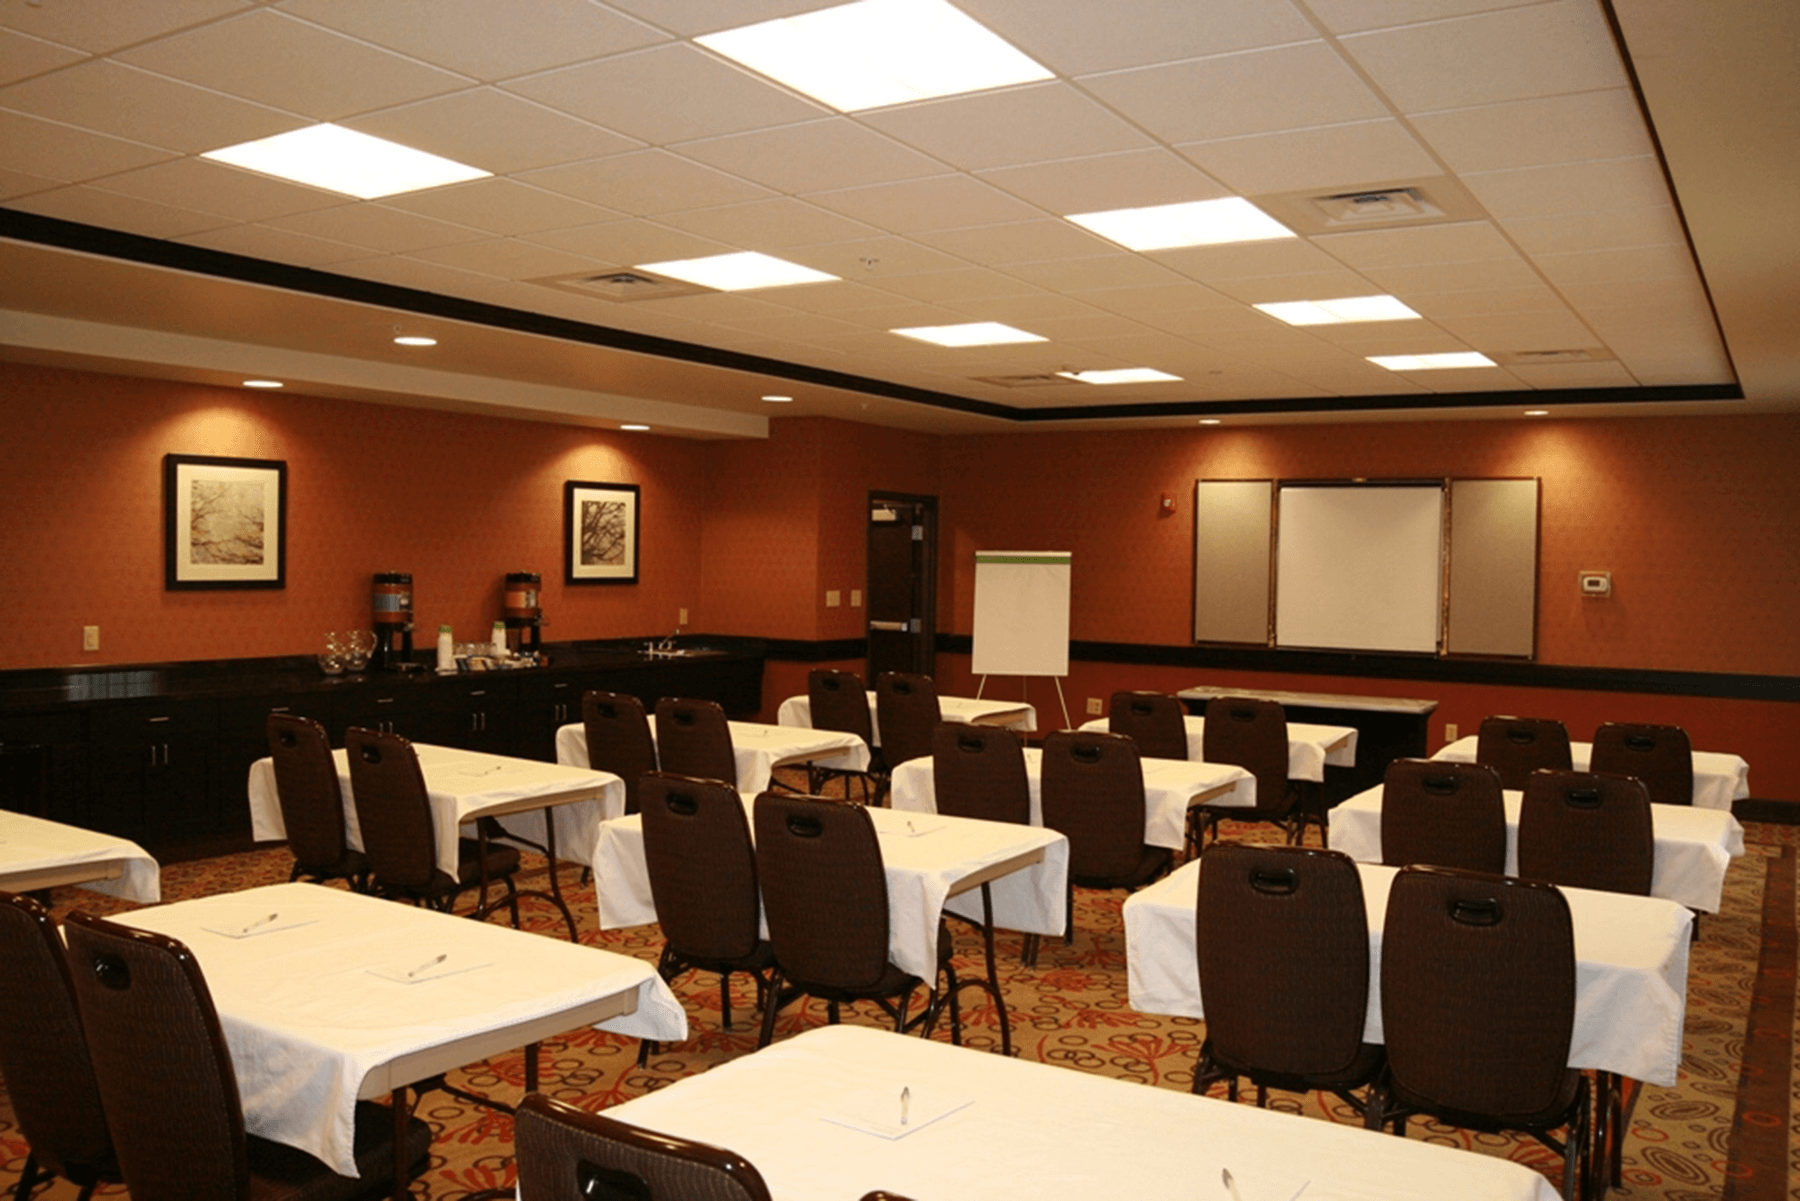  Hampton Inn and Suites conference room interior 